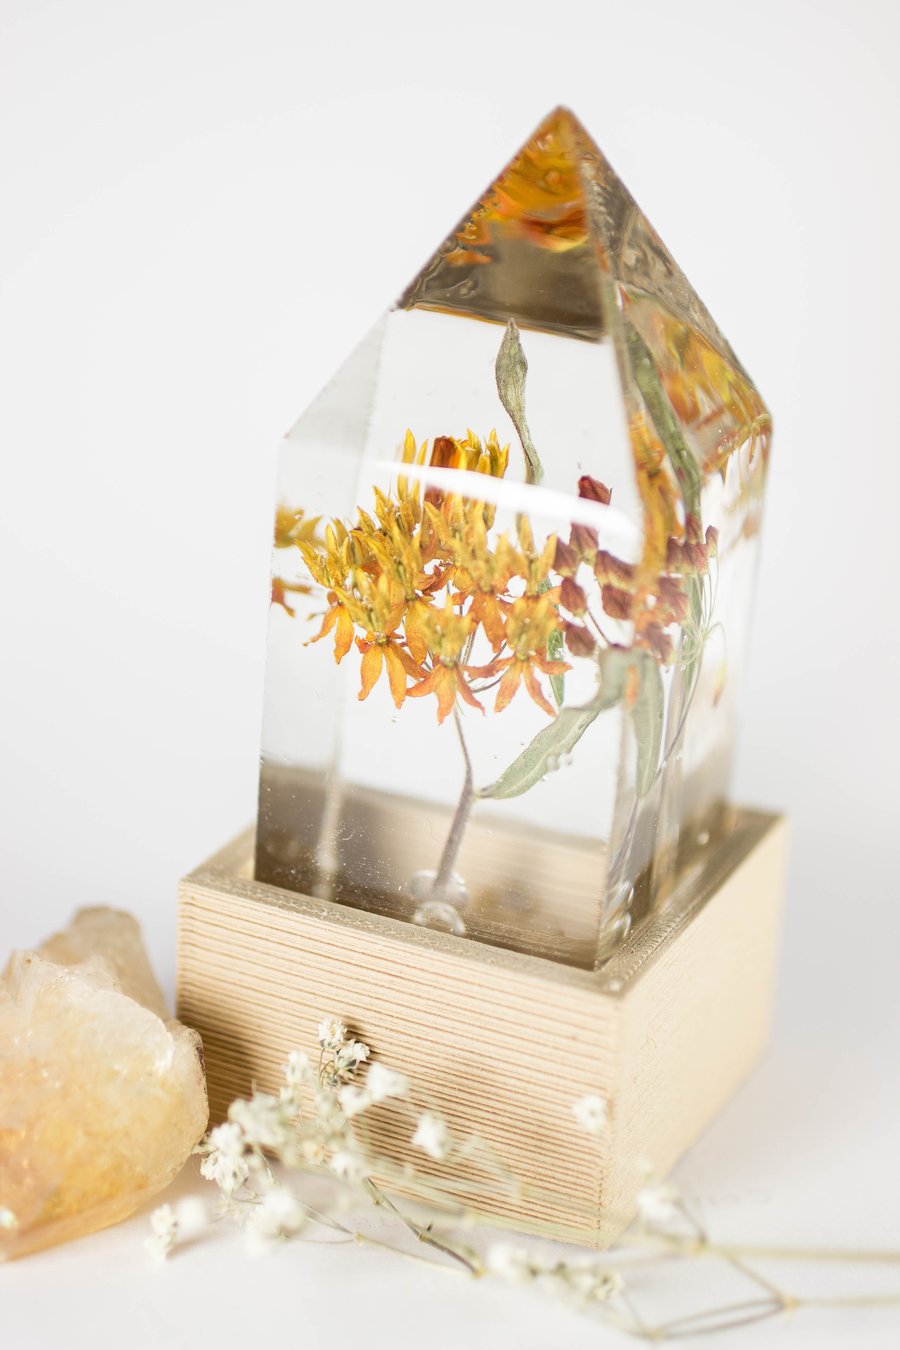 Image of Butterfly Weed (Asclepias tuberosa) - Floral Prism Desk Lamp